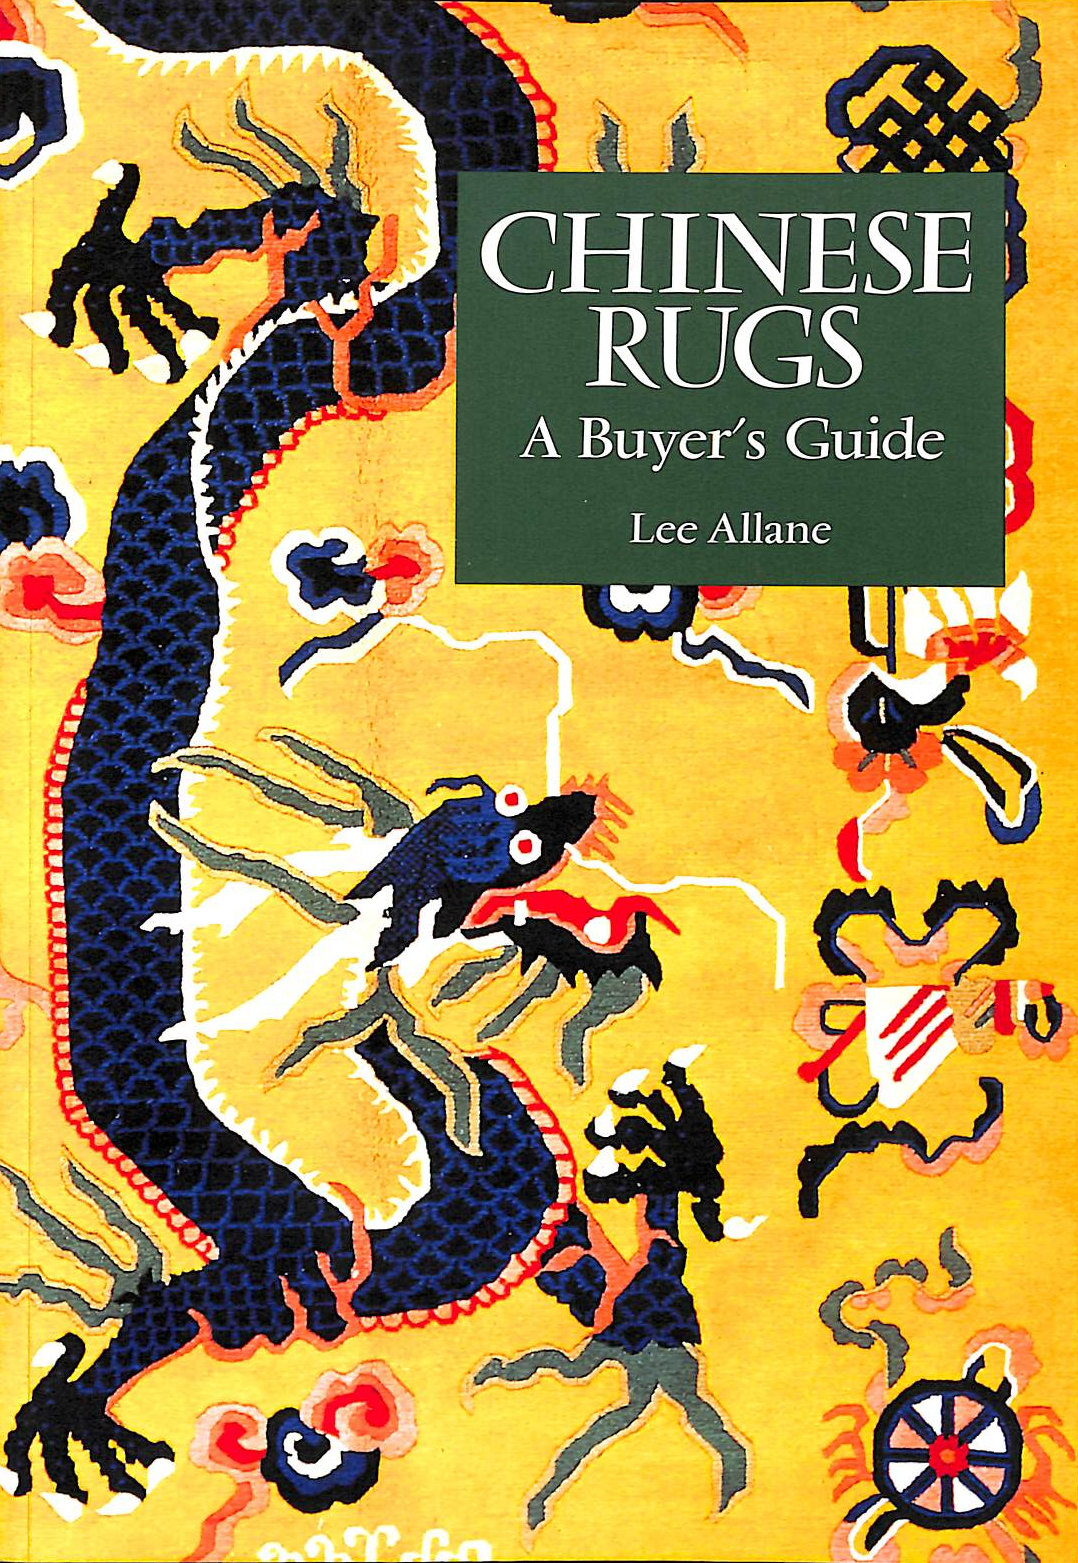 LEE ALLANE - Chinese Rugs: A Buyer's Guide